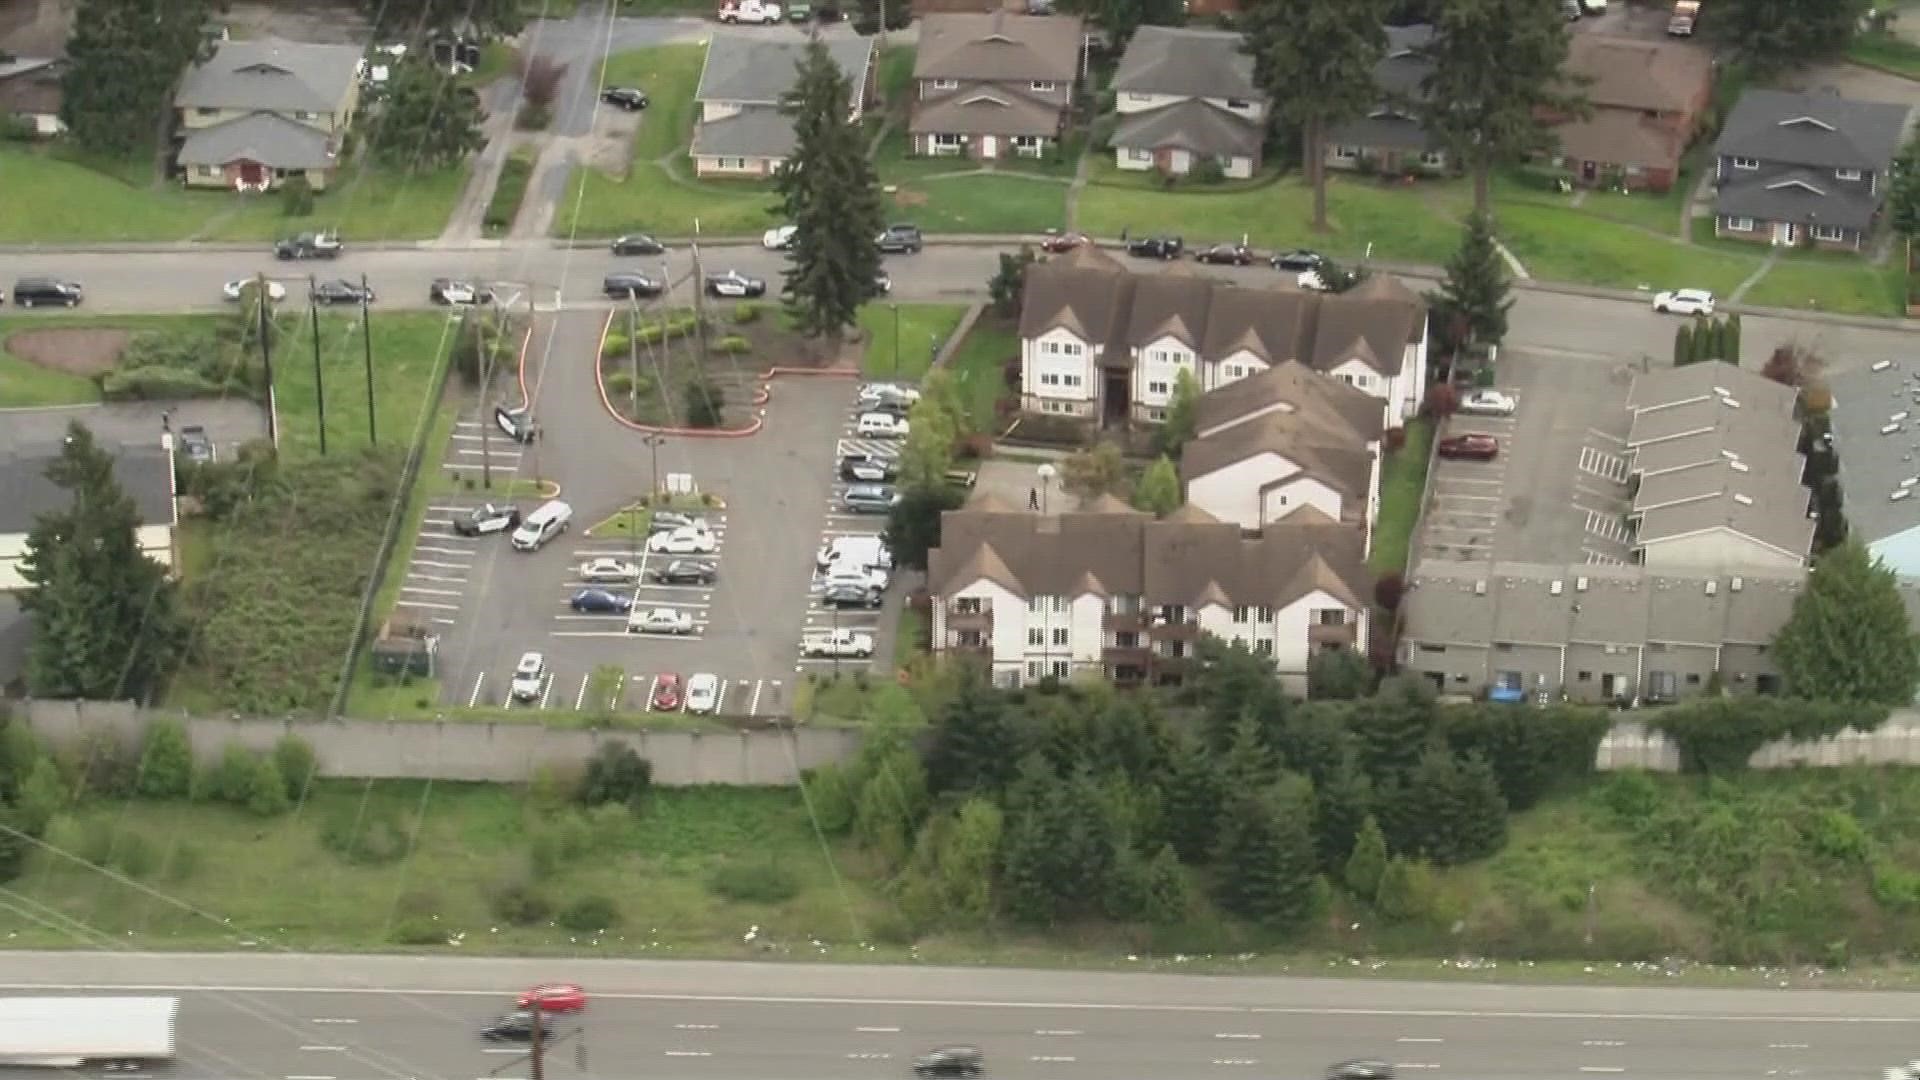 One man was critically injured in a shooting at an apartment building in Everett on April 26, 2022.